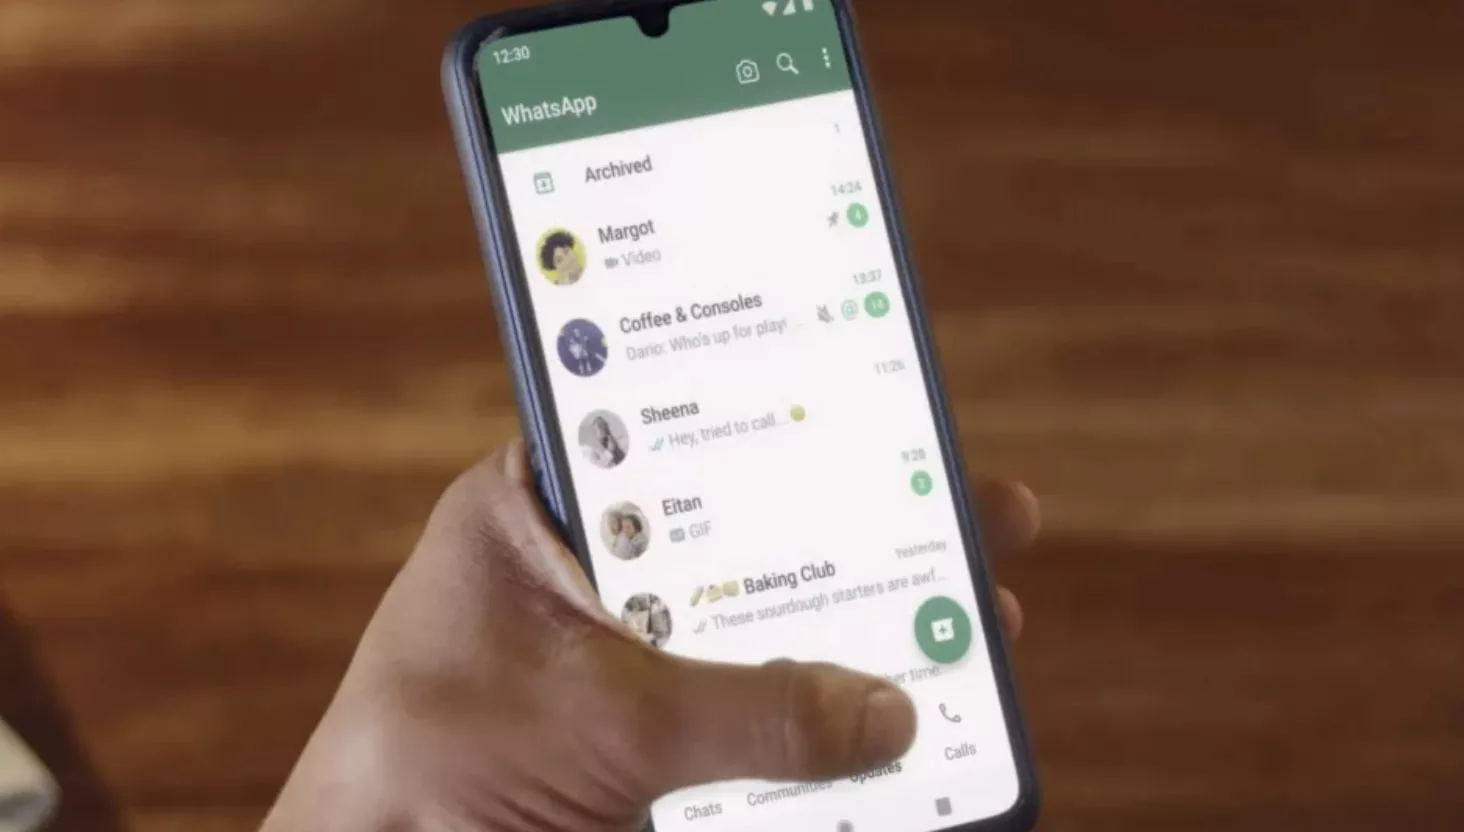 WhatsApp introduces 'Channels' feature, bridging the gap between messaging and social media